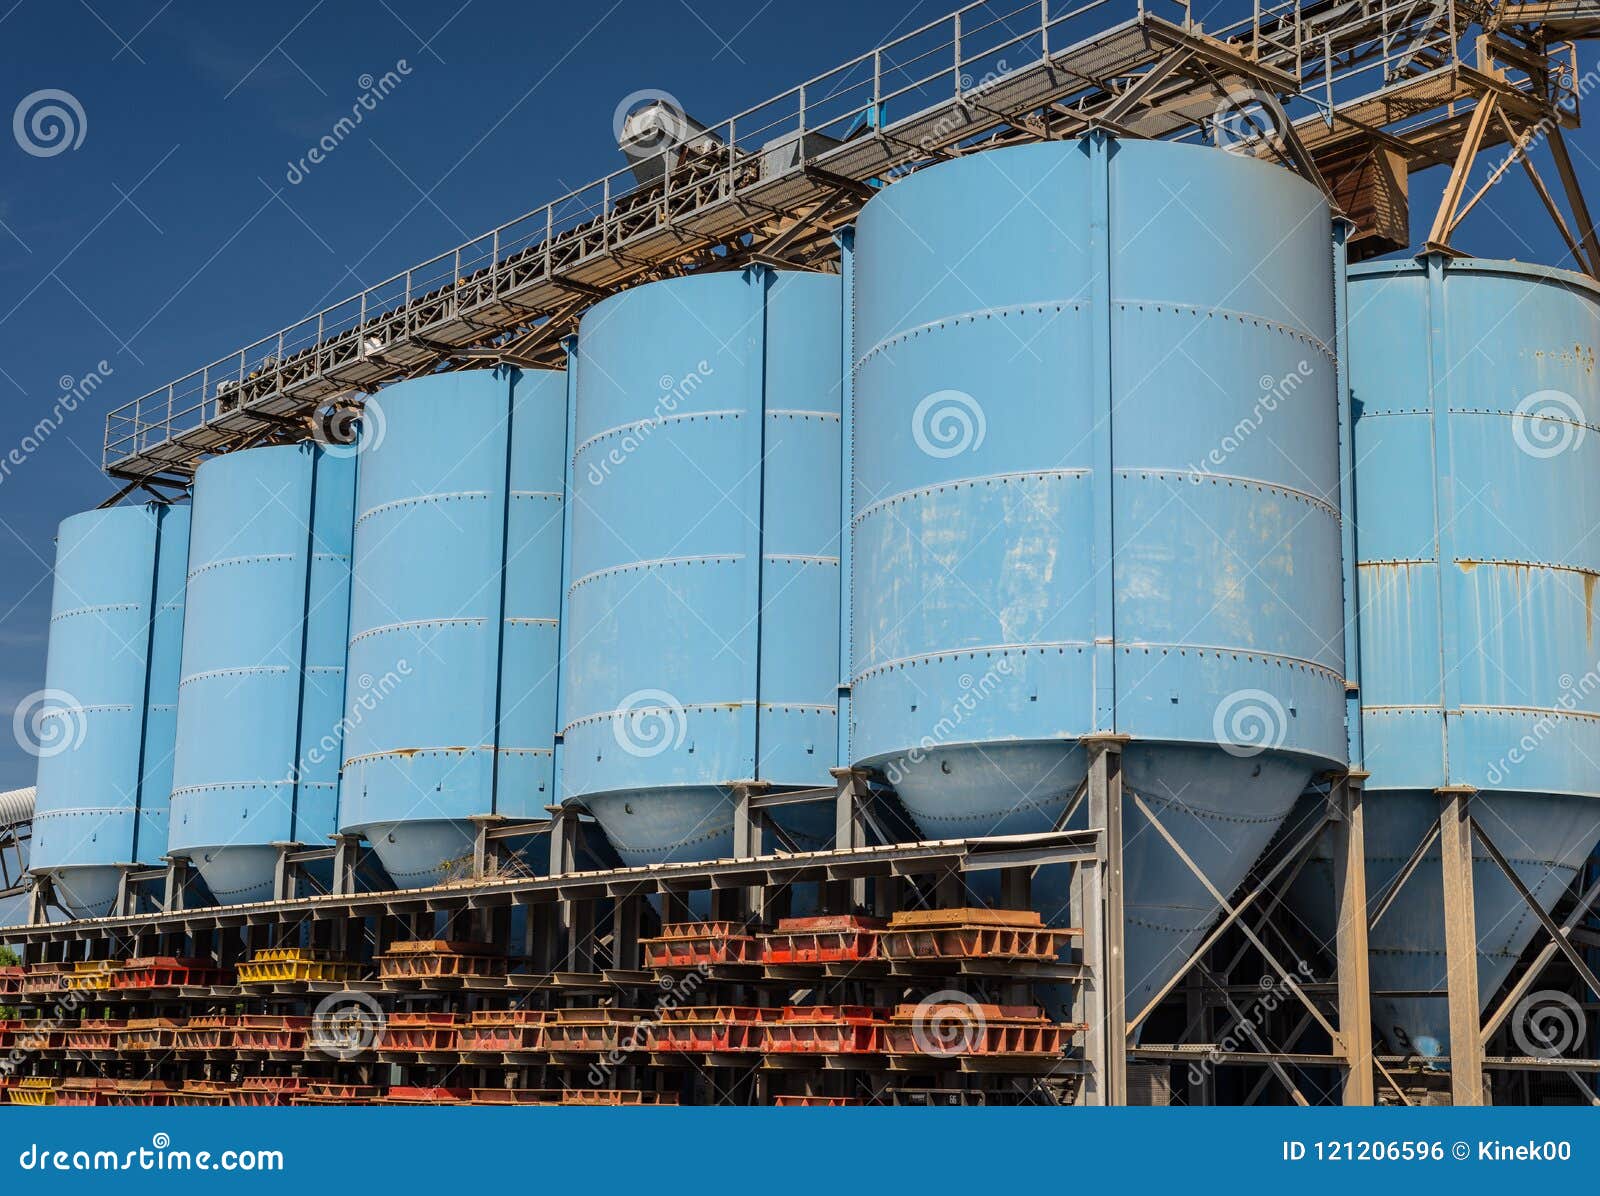 Big Blue Metallic Industrial Silos for the Production of Cement at an ...